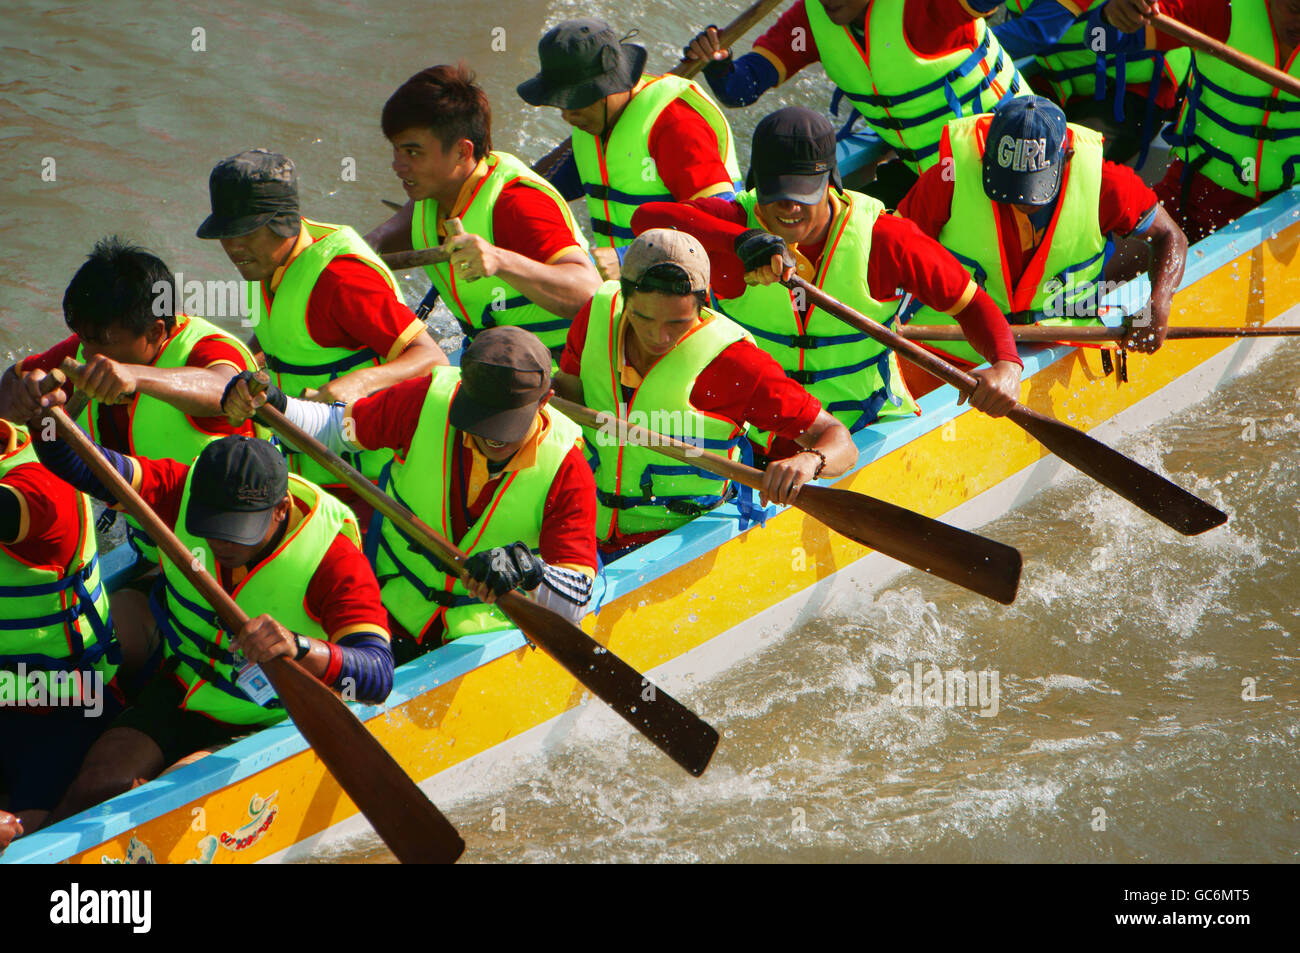 Teamwork of man, rowing dragon boat in racing, try to row with high speed and championship spirit, rhythm of paddle so dynamic Stock Photo